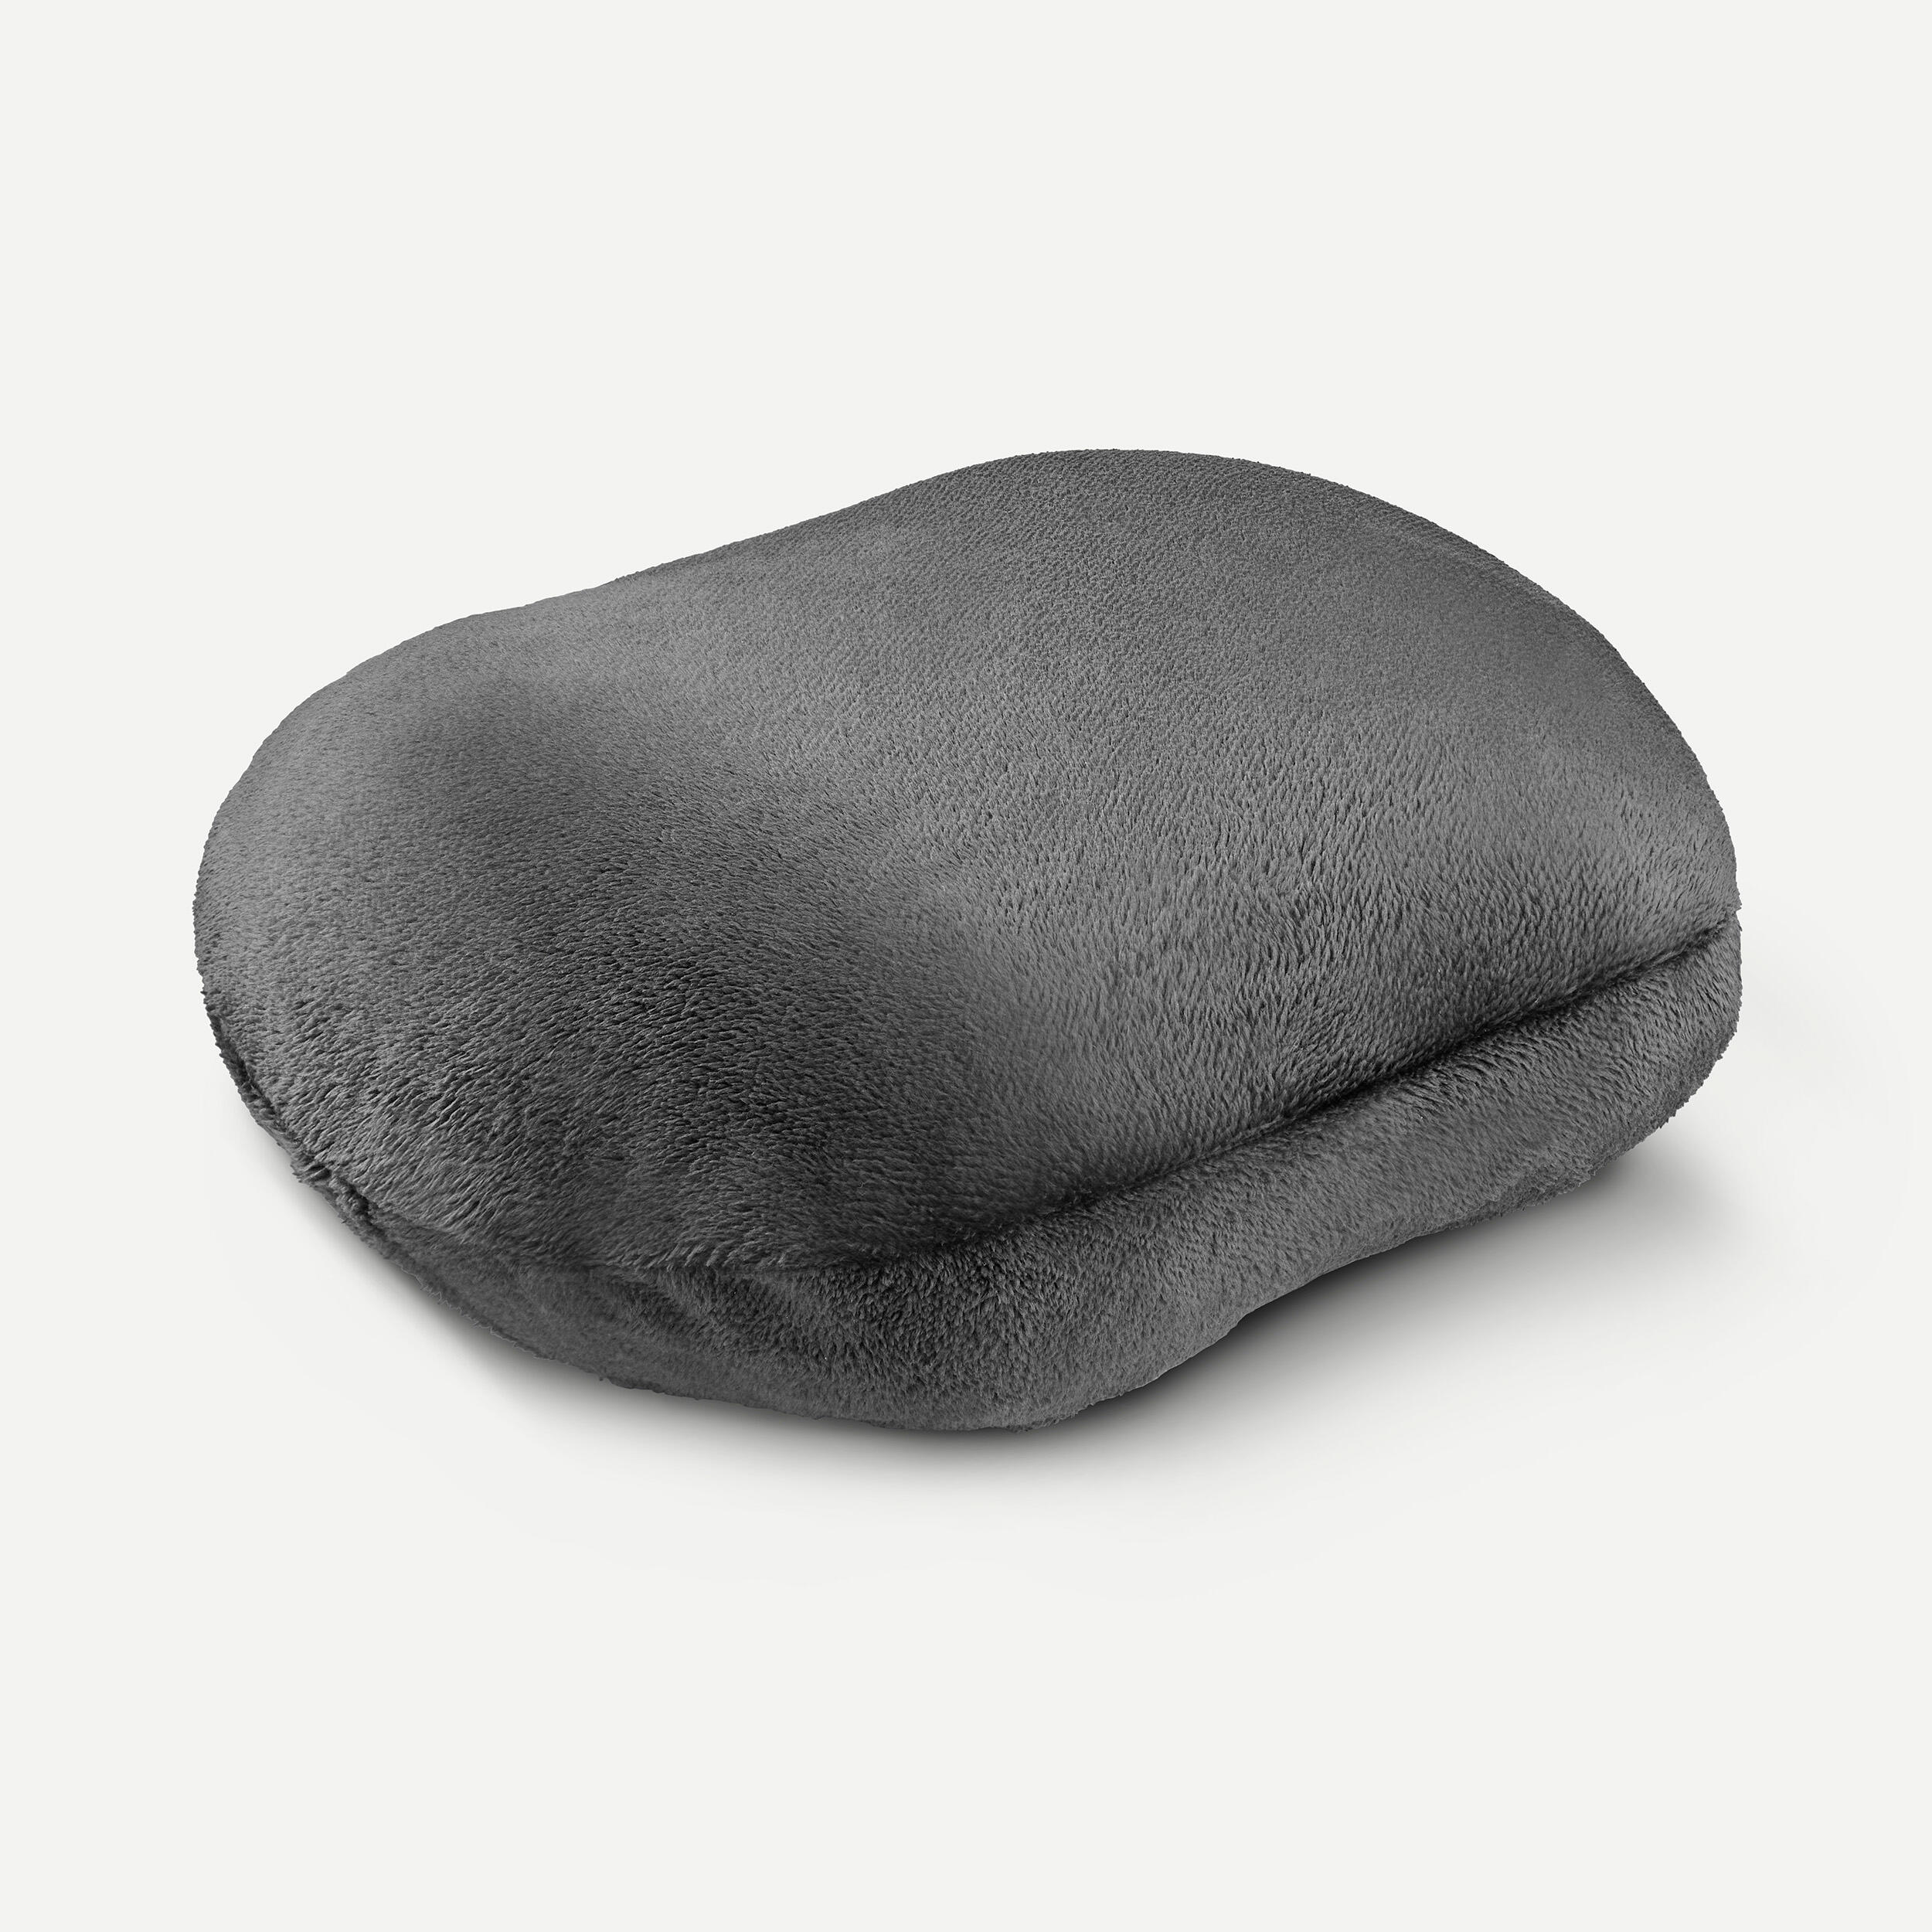 2-In-1 Travel Pillow - Travel 500